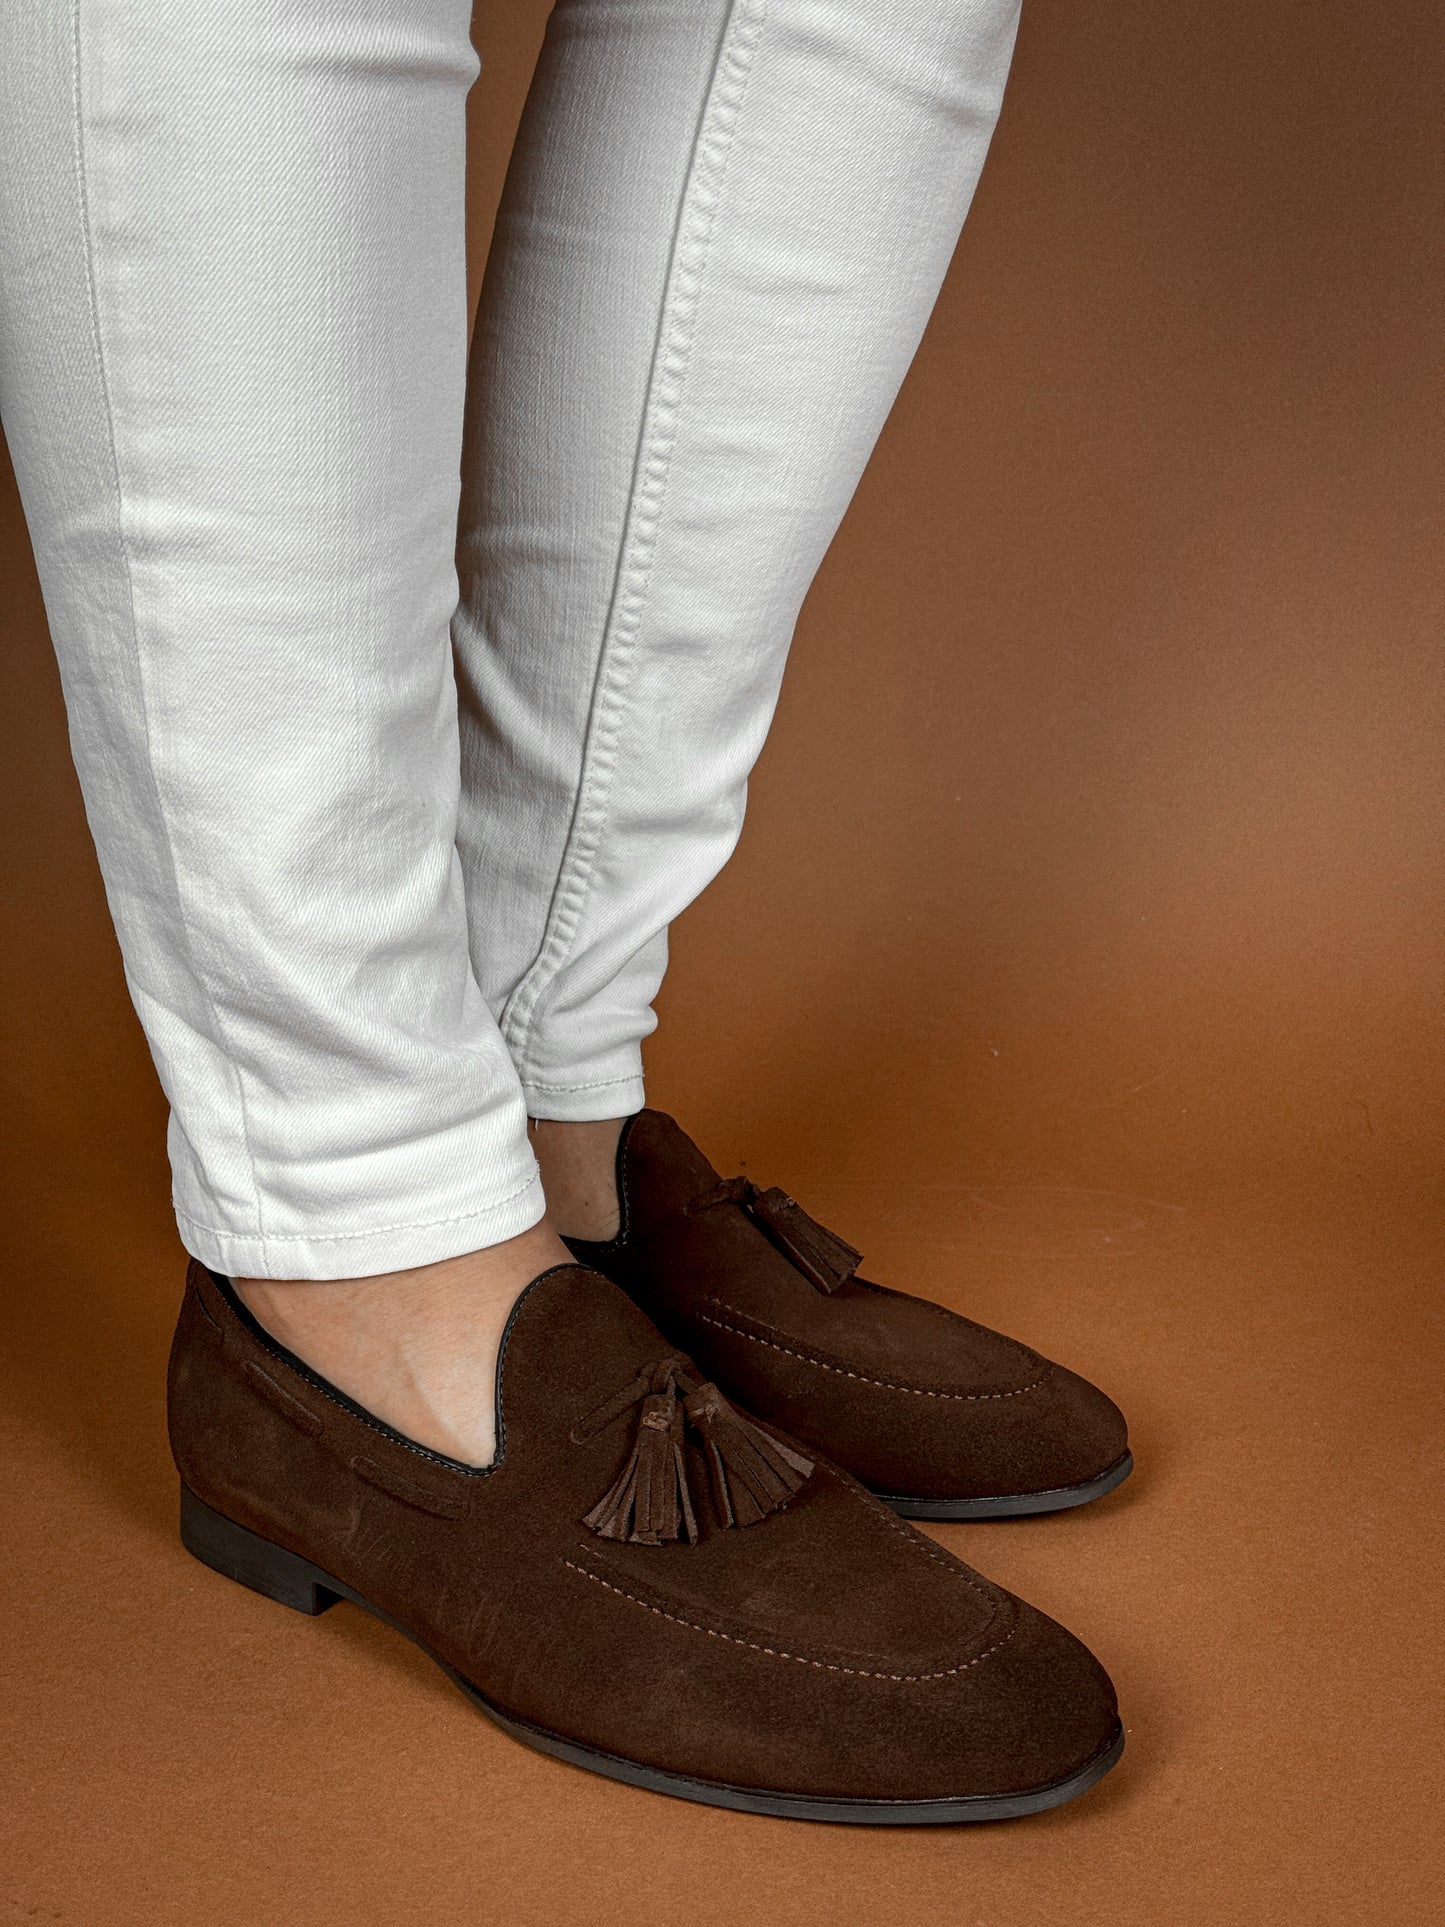 BROWN SUEDE LOAFER